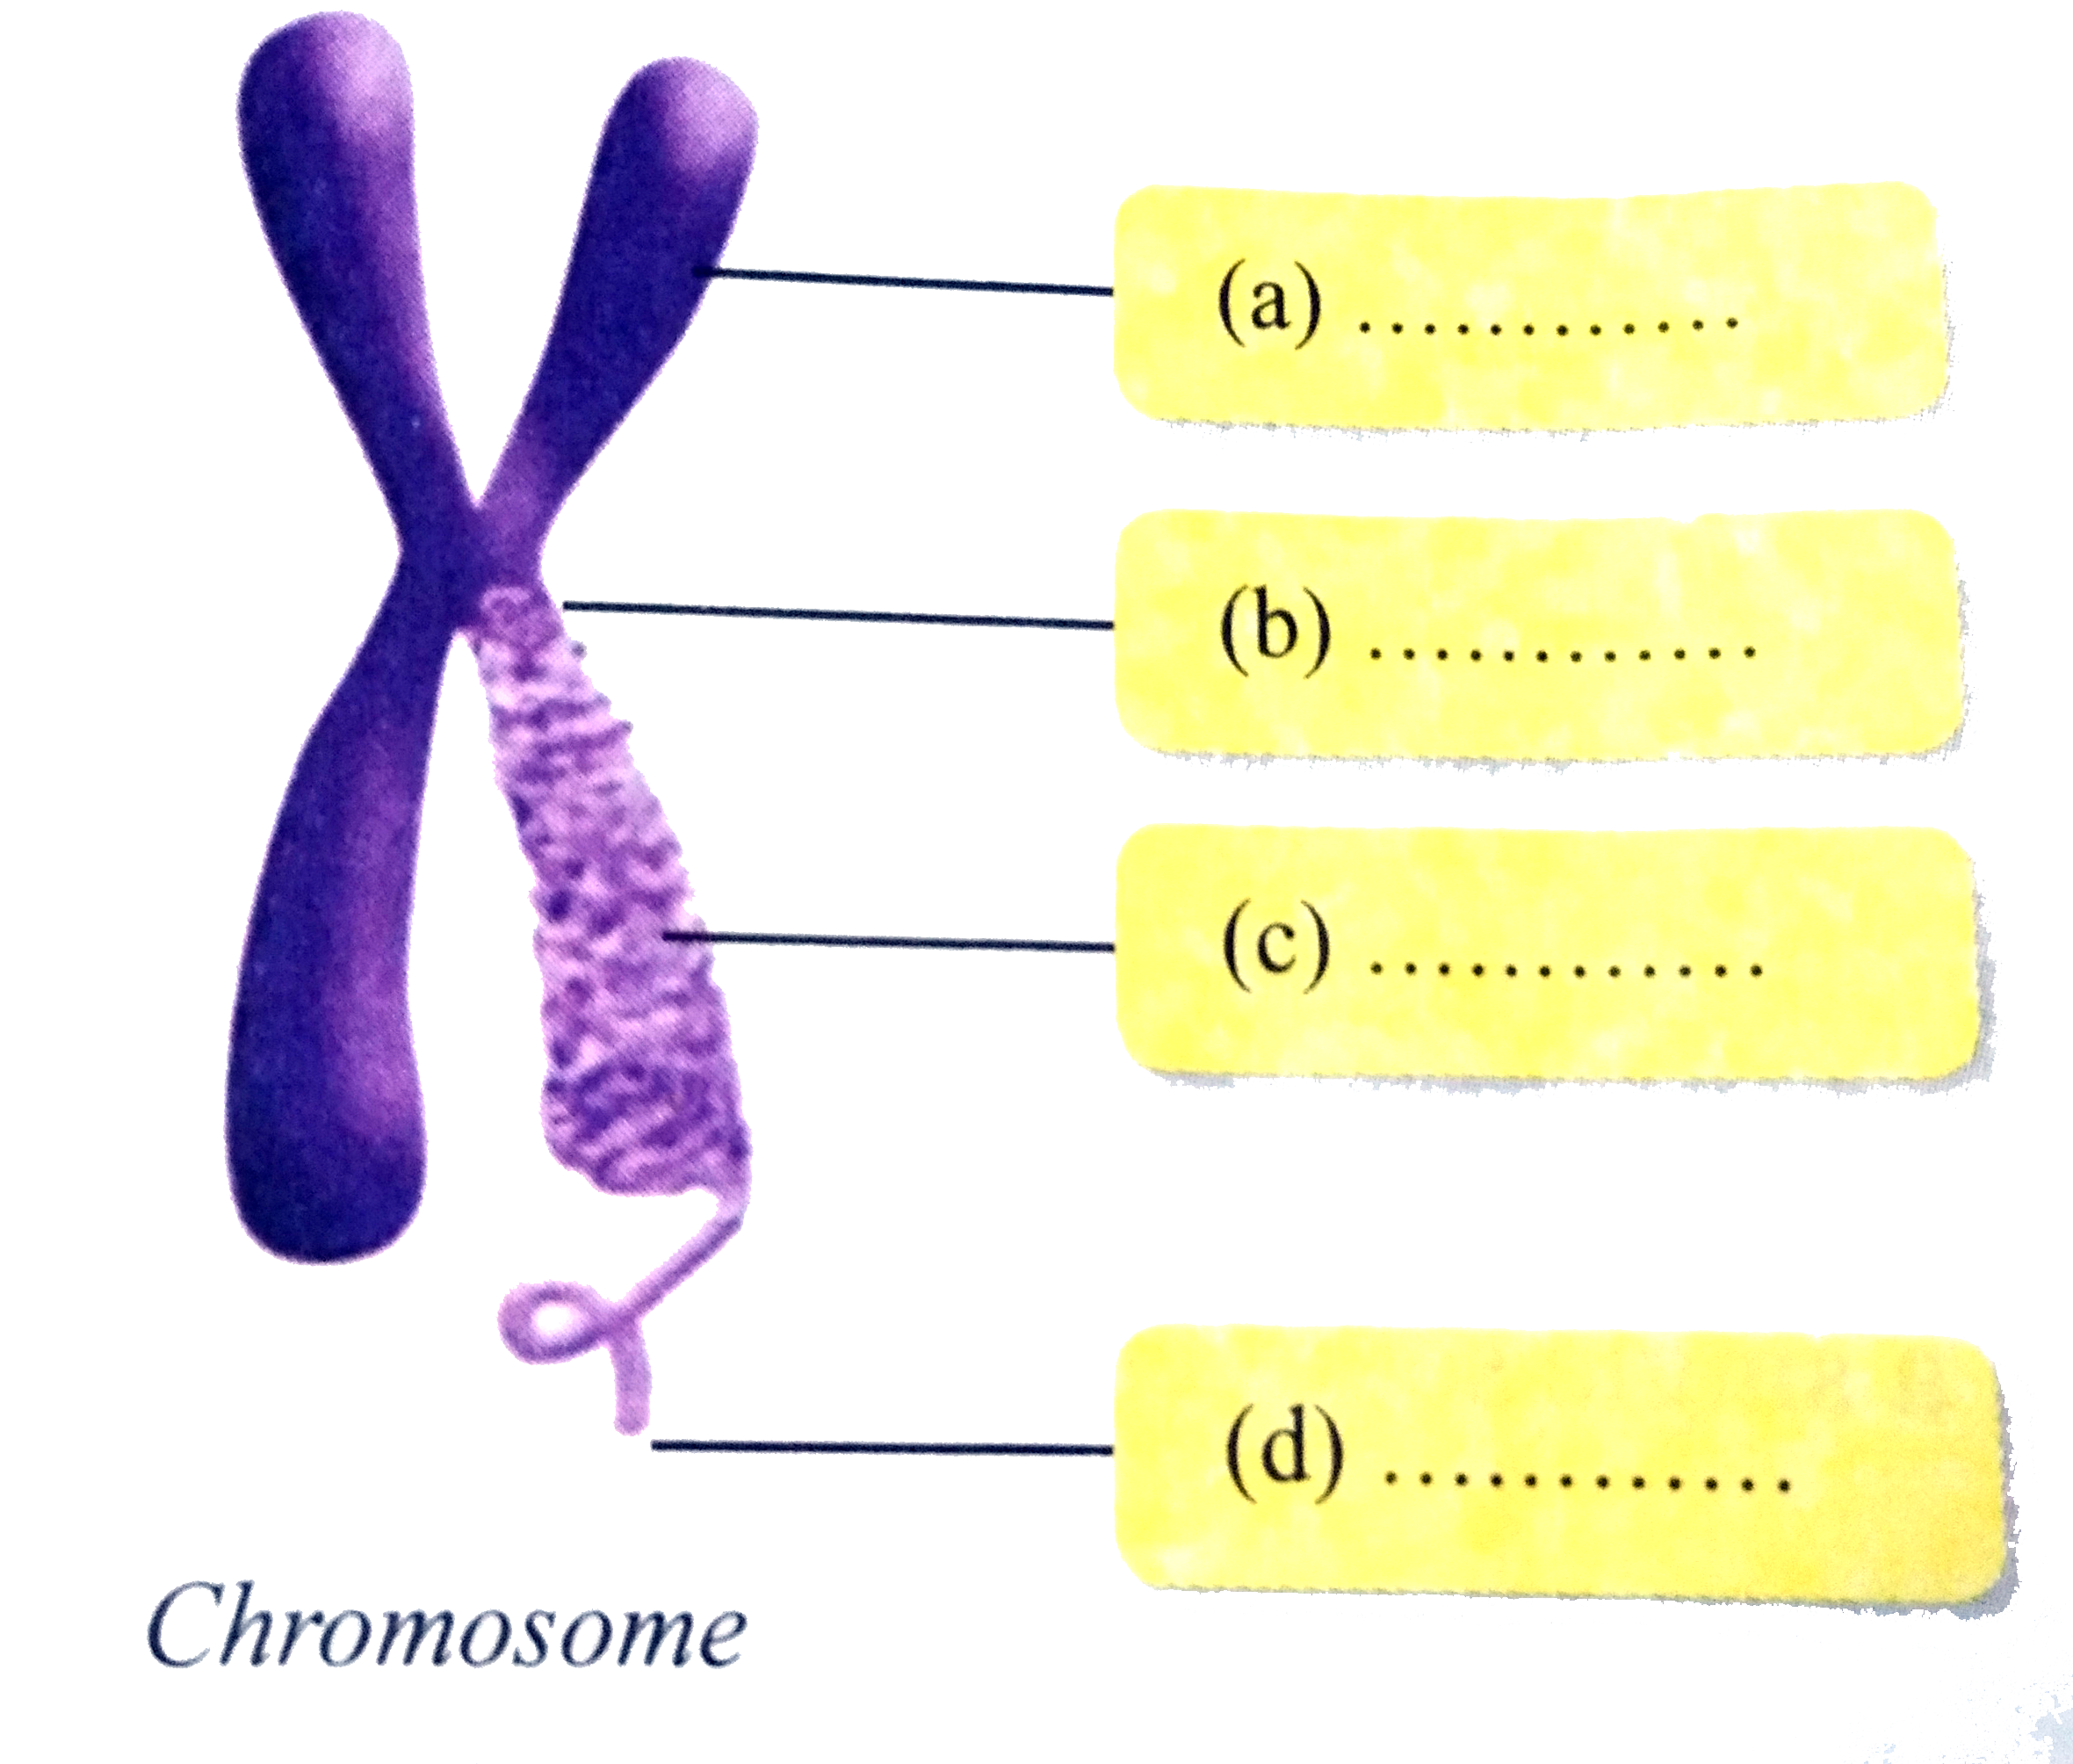 What is the shape of chromosome ? Give its names in the figure ?